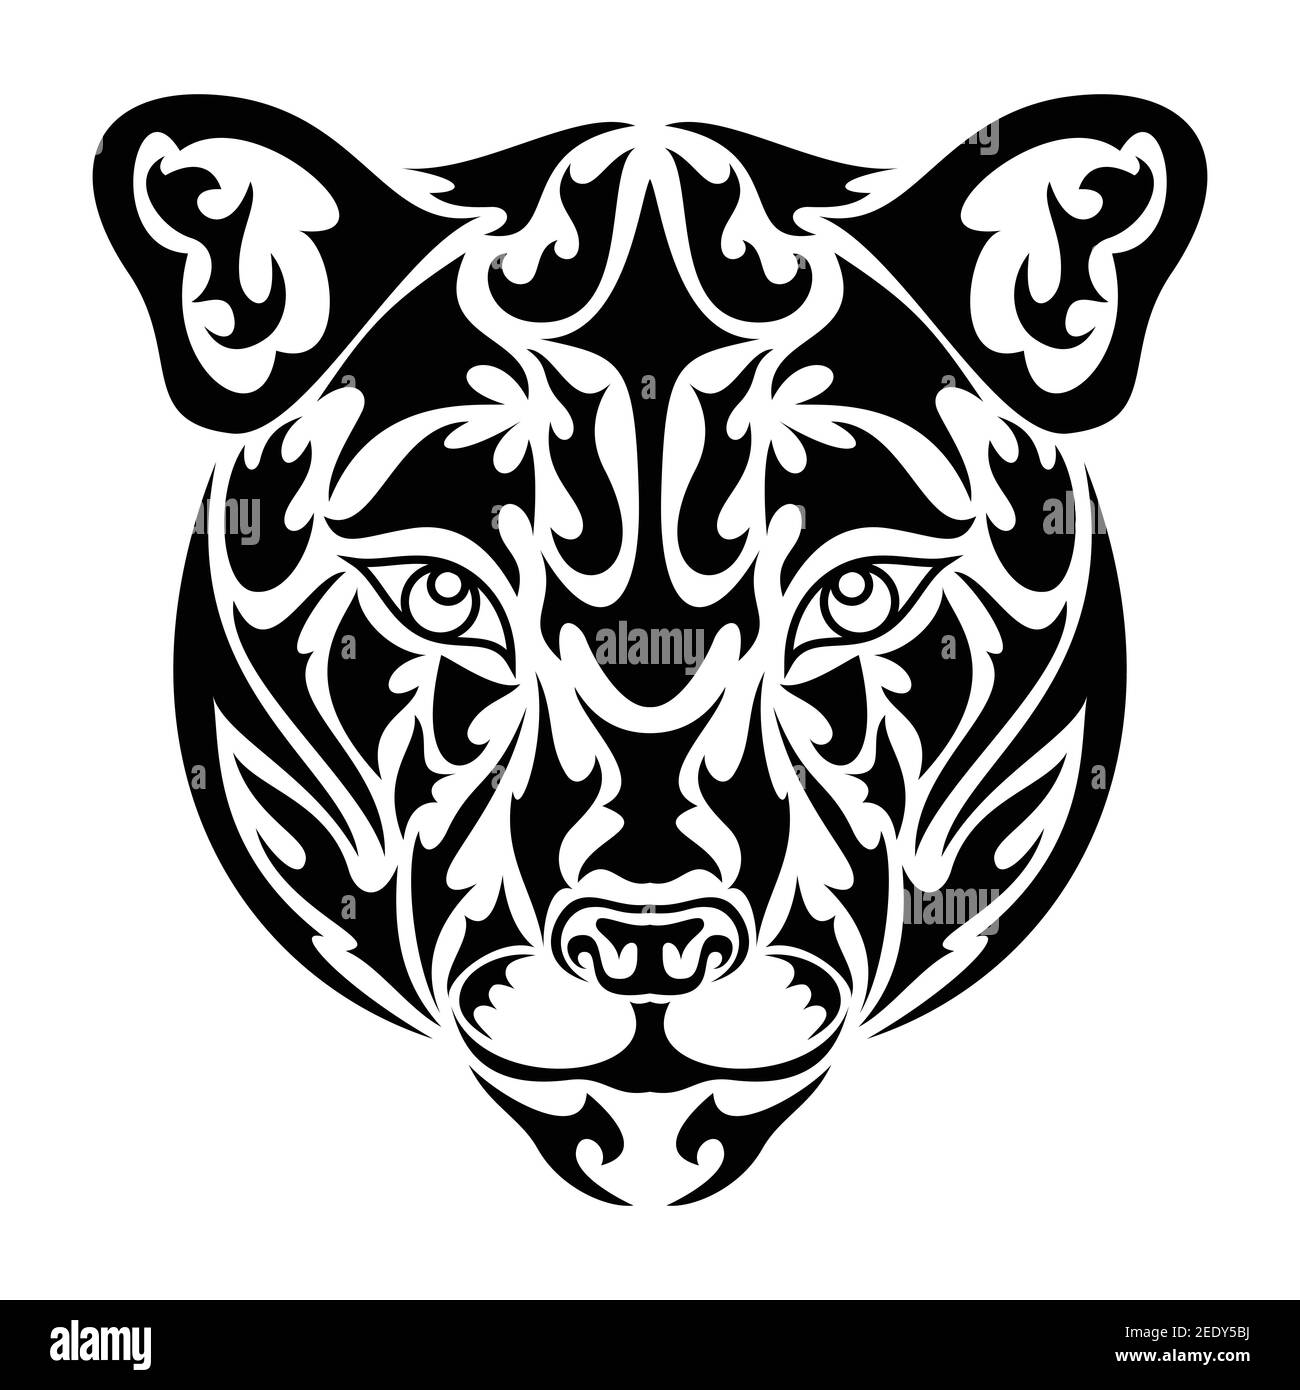 Hand drawn abstract portrait of a puma. Vector stylized illustration for tattoo, logo, wall decor, T-shirt print design or outwear. This drawing would Stock Vector